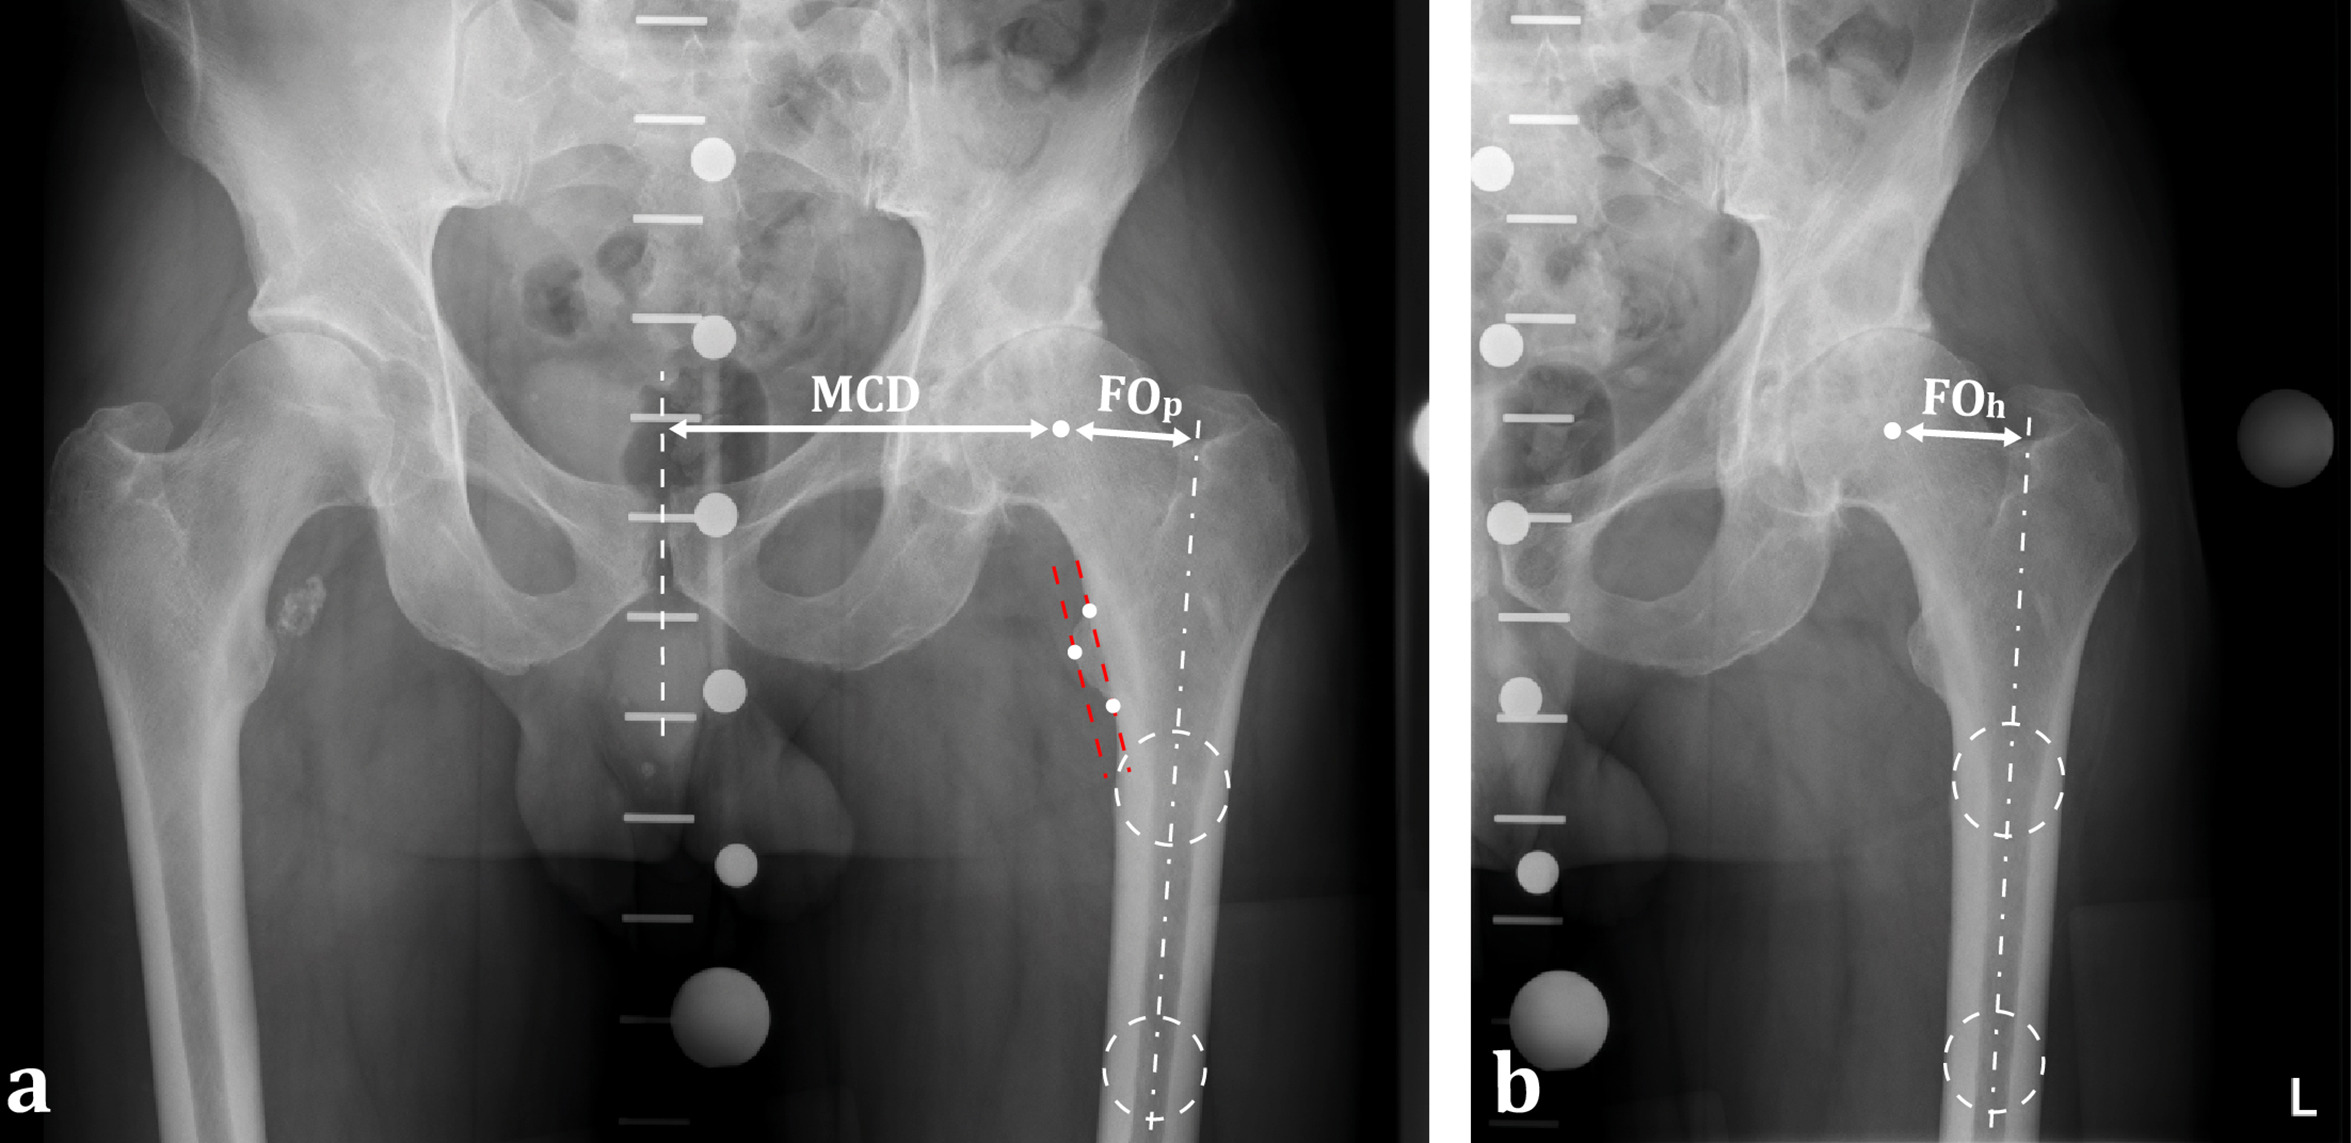 Fig. 1 
            a) Preoperative anteroposterior (AP) pelvis radiograph with KingMark calibration markers. Femoral offset (FOp) was calculated as the perpendicular distance between the femoral shaft axis and the femoral head centre. The mid-centre distance (MCD) was defined as the shortest distance between the midline of the pelvis and the centre of the femoral head. Rotation of the femoral neck to the detector plane was assessed using the thickness of the lesser trochanter (TLT) defined by the perpendicular distance between the two dotted parallel lines; the proximal and distal cortical intersection between the lesser trochanter and the femoral cortex defined the first line, and the outer prominent contour of the lesser trochanter defined the second line. b) Preoperative AP hip radiograph with KingMark calibration markers and femoral offset measurement (FOh).
          